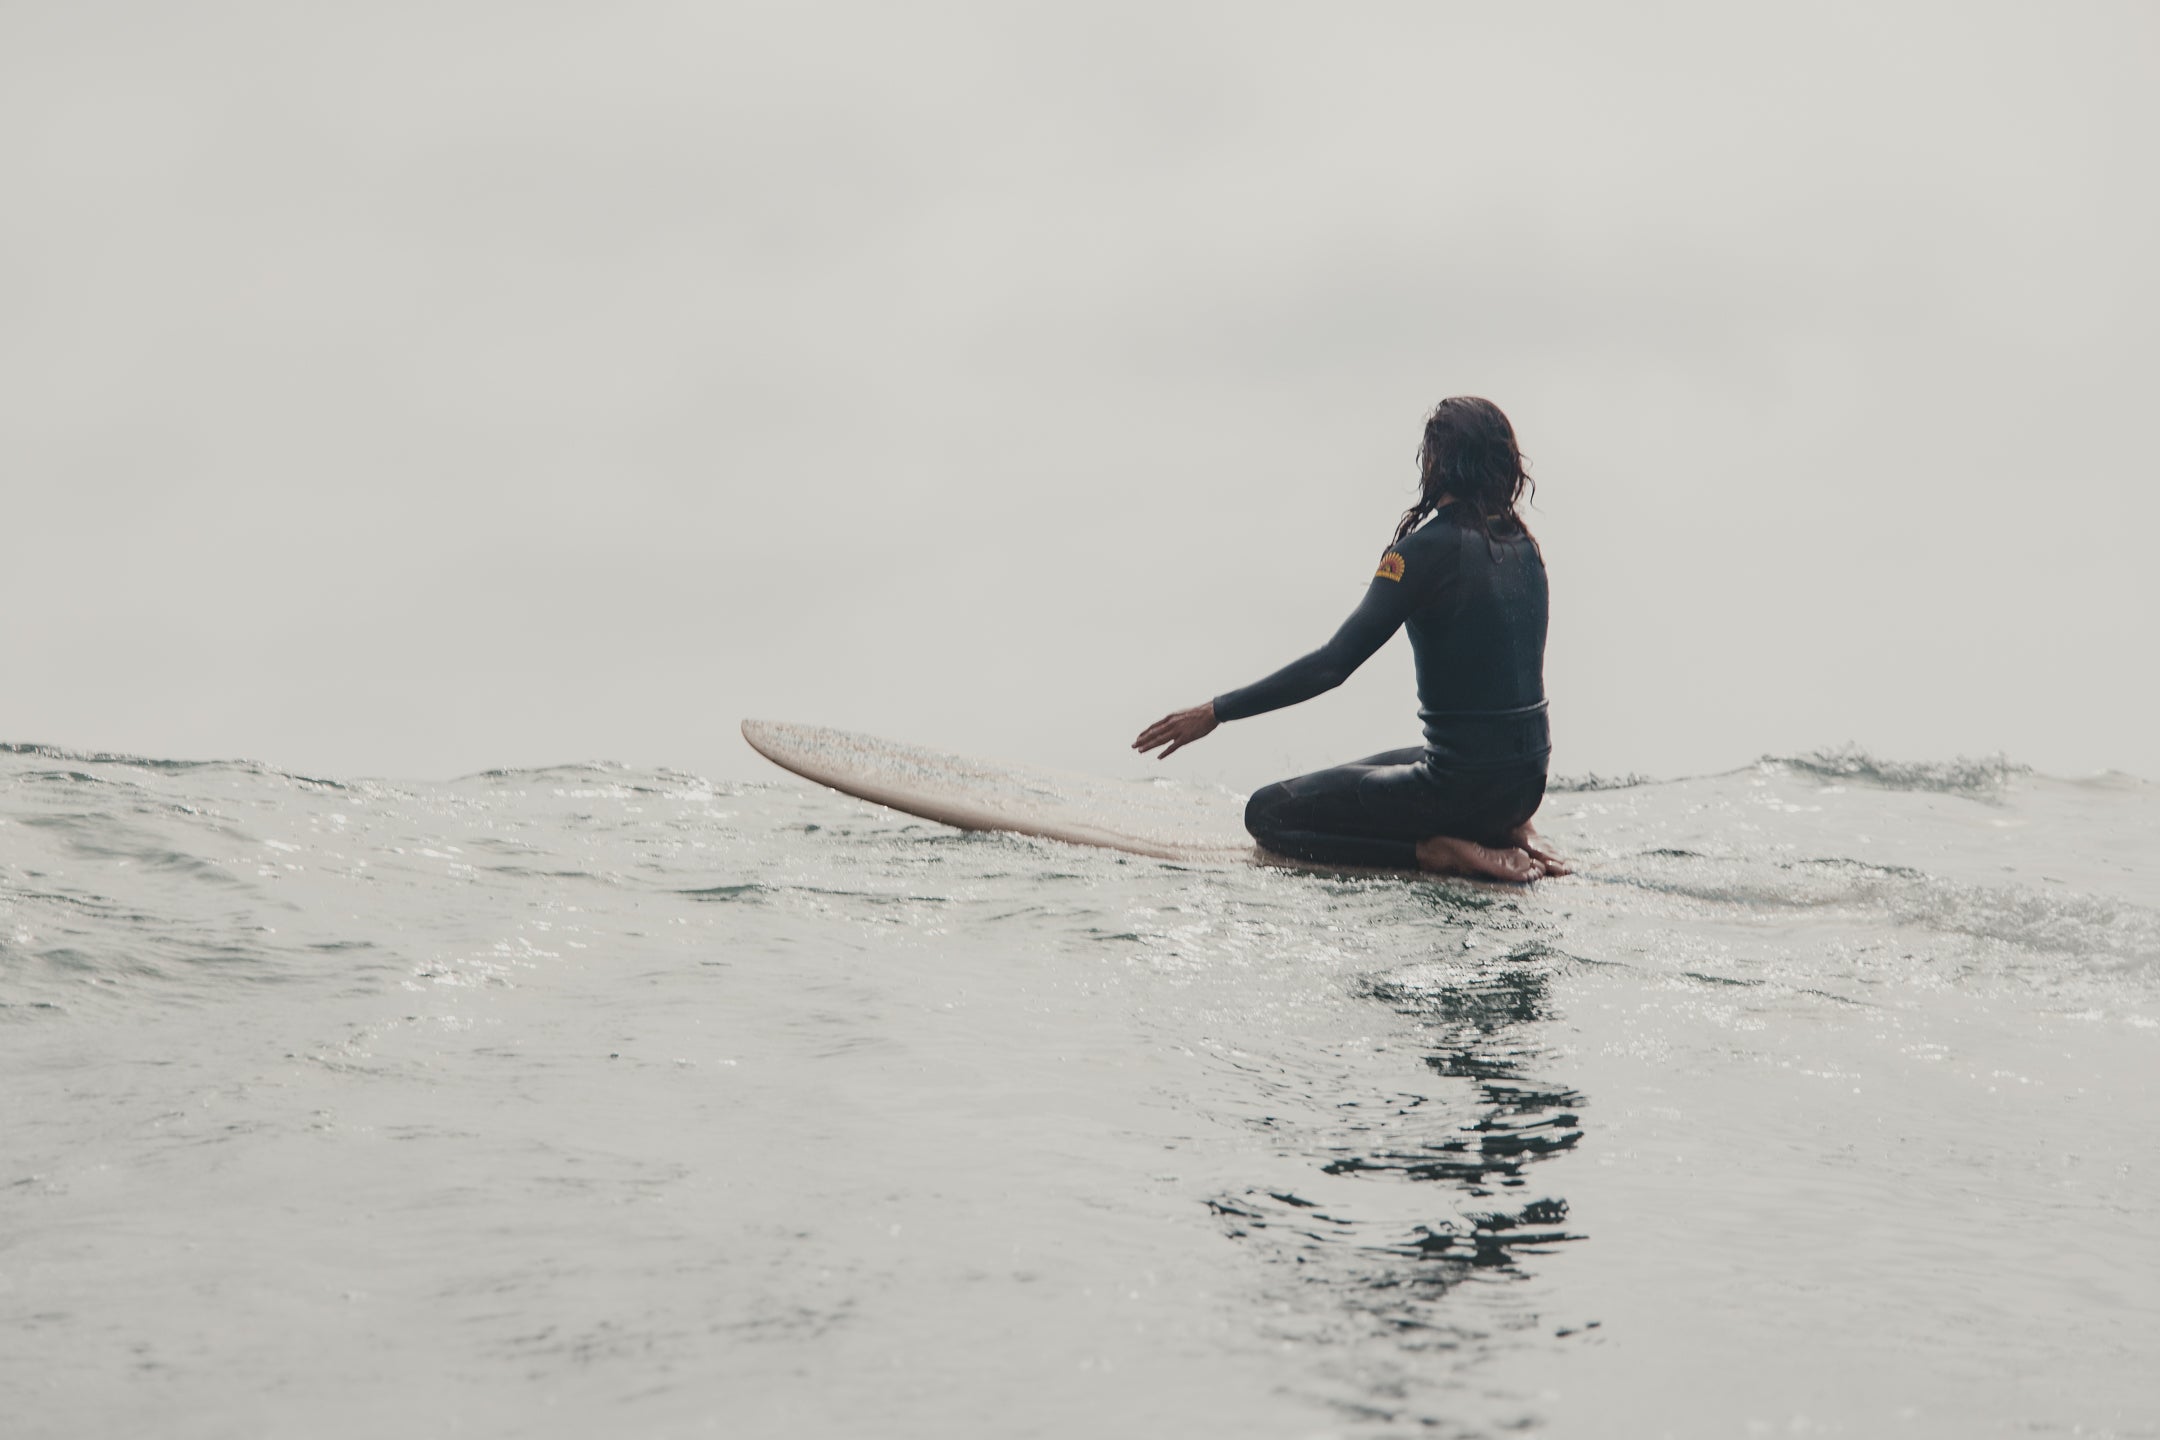 What's the Secret That Makes Almond Surfboards Paddle Faster?